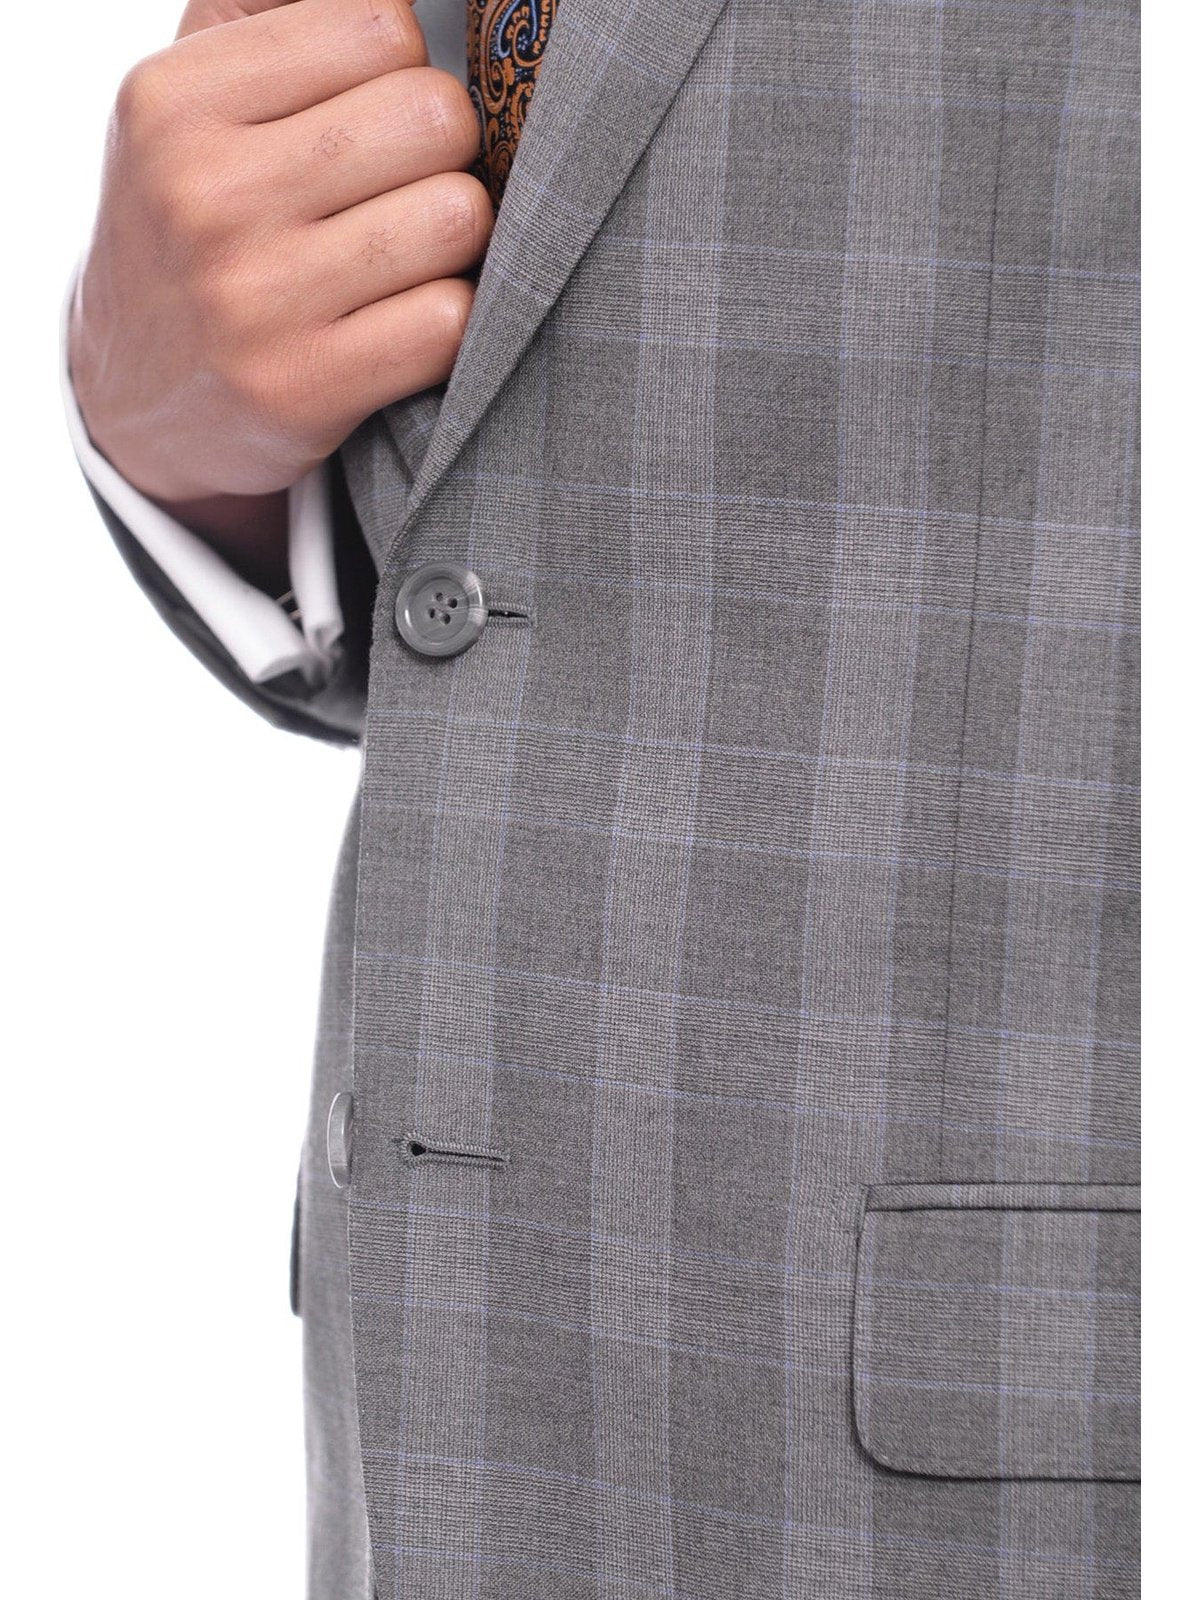 Napoli TWO PIECE SUITS Napoli Classic Fit Gray Glen Plaid Half Canvassed Super 150s Wool Suit